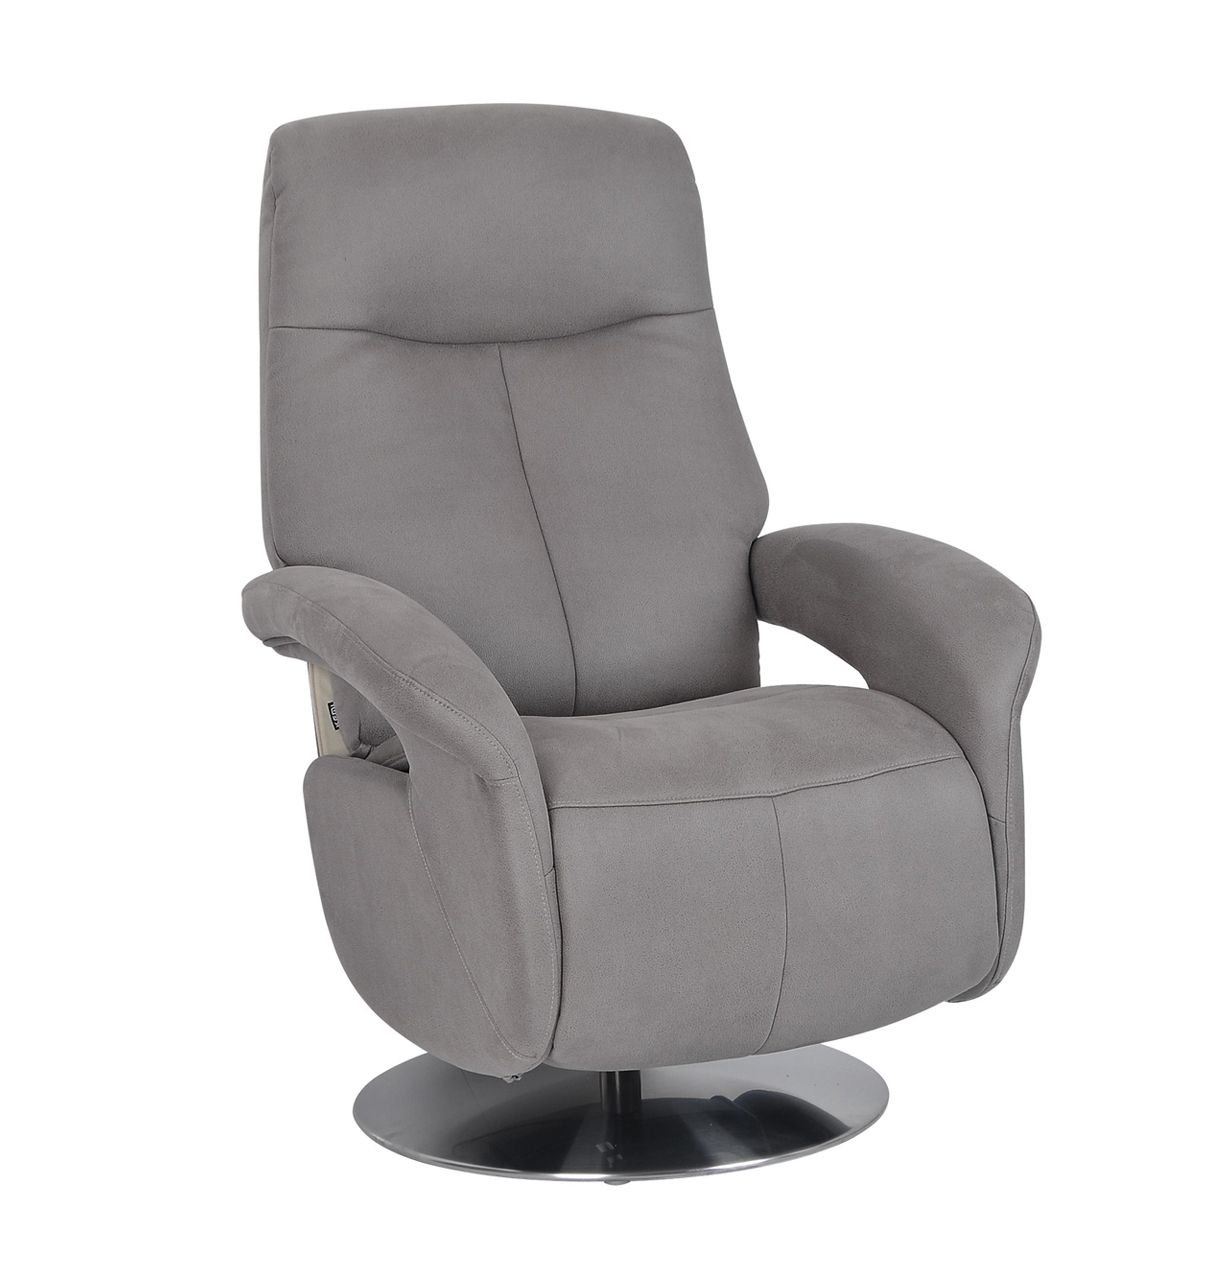 Manual Relaxation Armchair - Leather and Microstar - THARROS